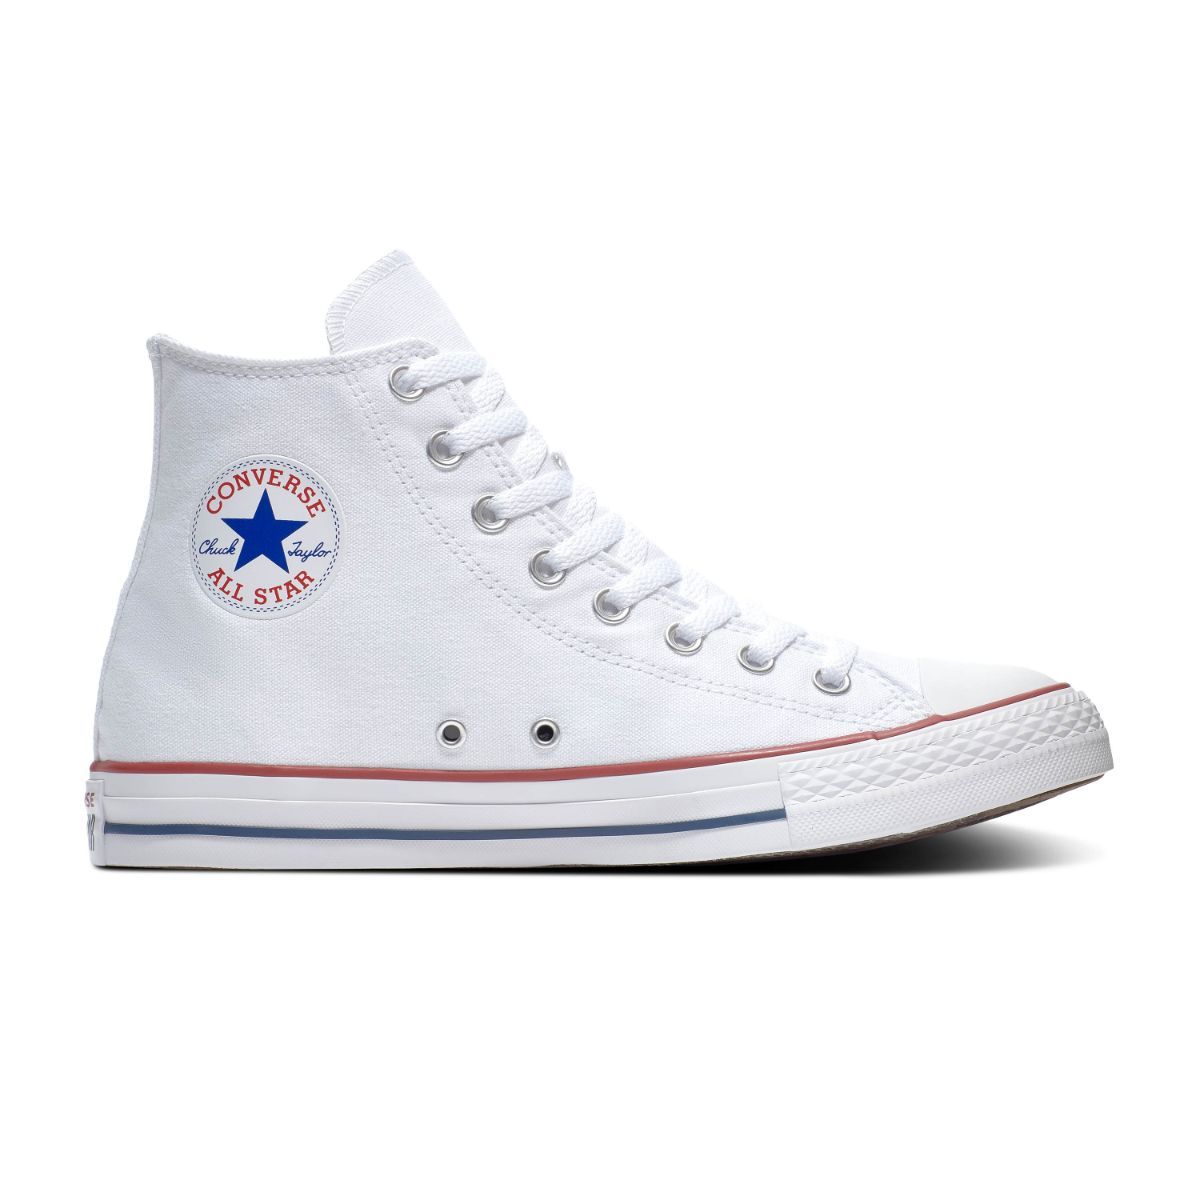 Chuck Taylor All Star White High Top